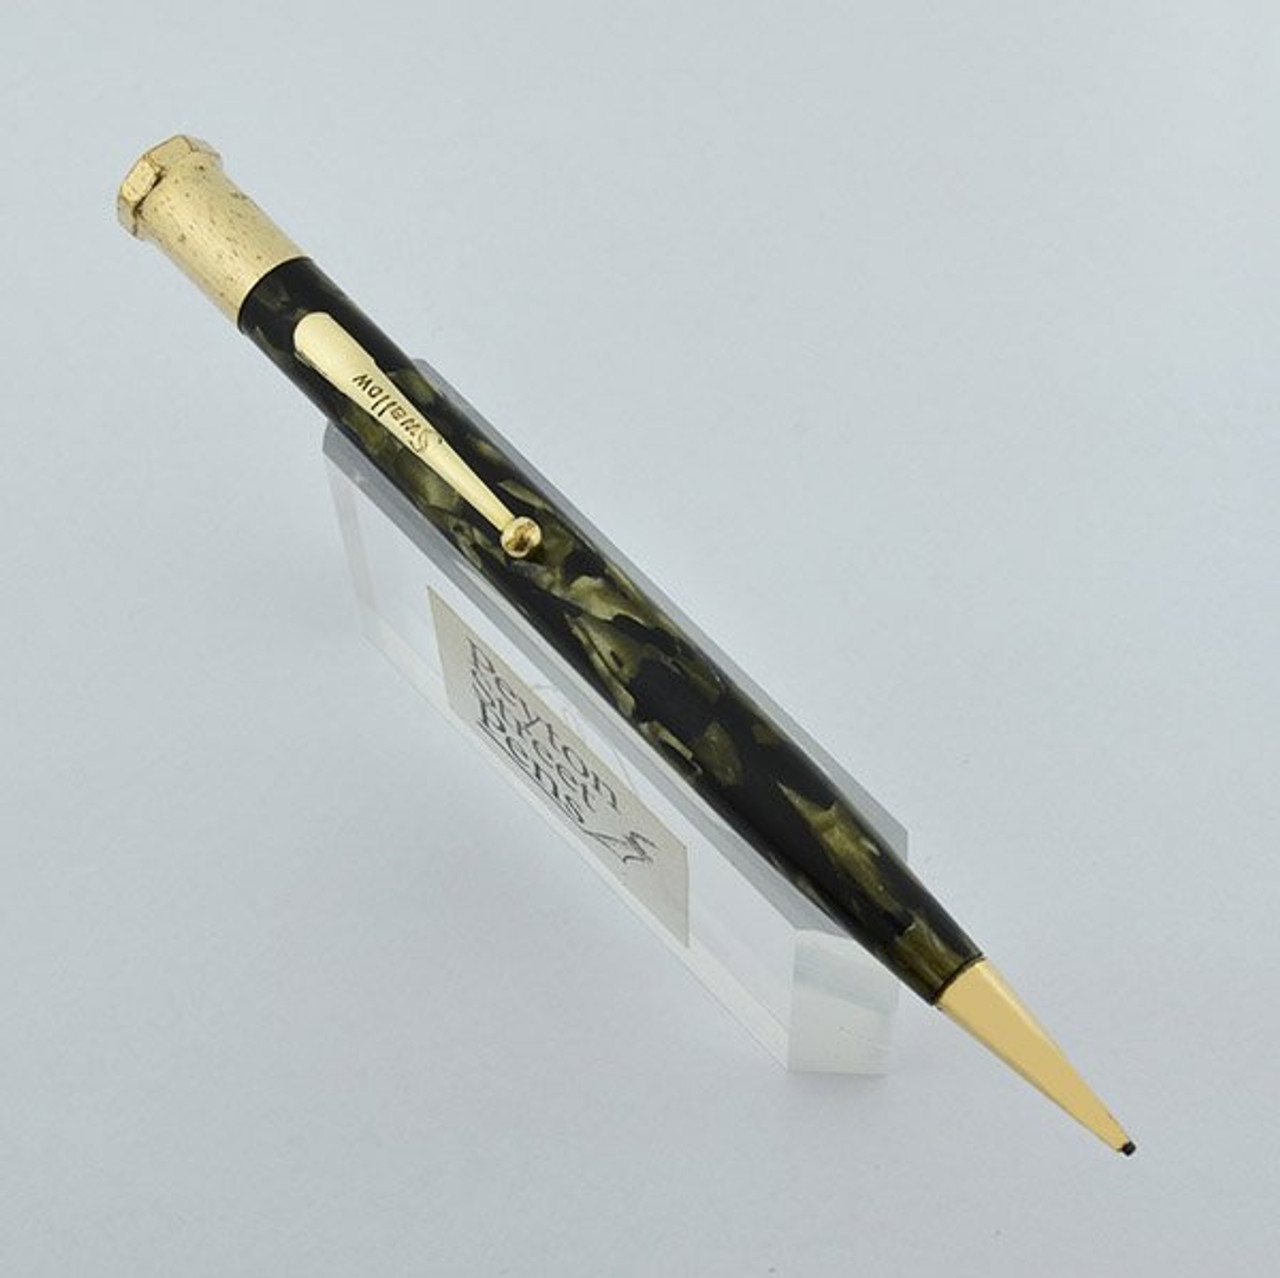 Mabie Todd Swallow Pencil - Full Size, Black & Green (Very Nice, Restored)